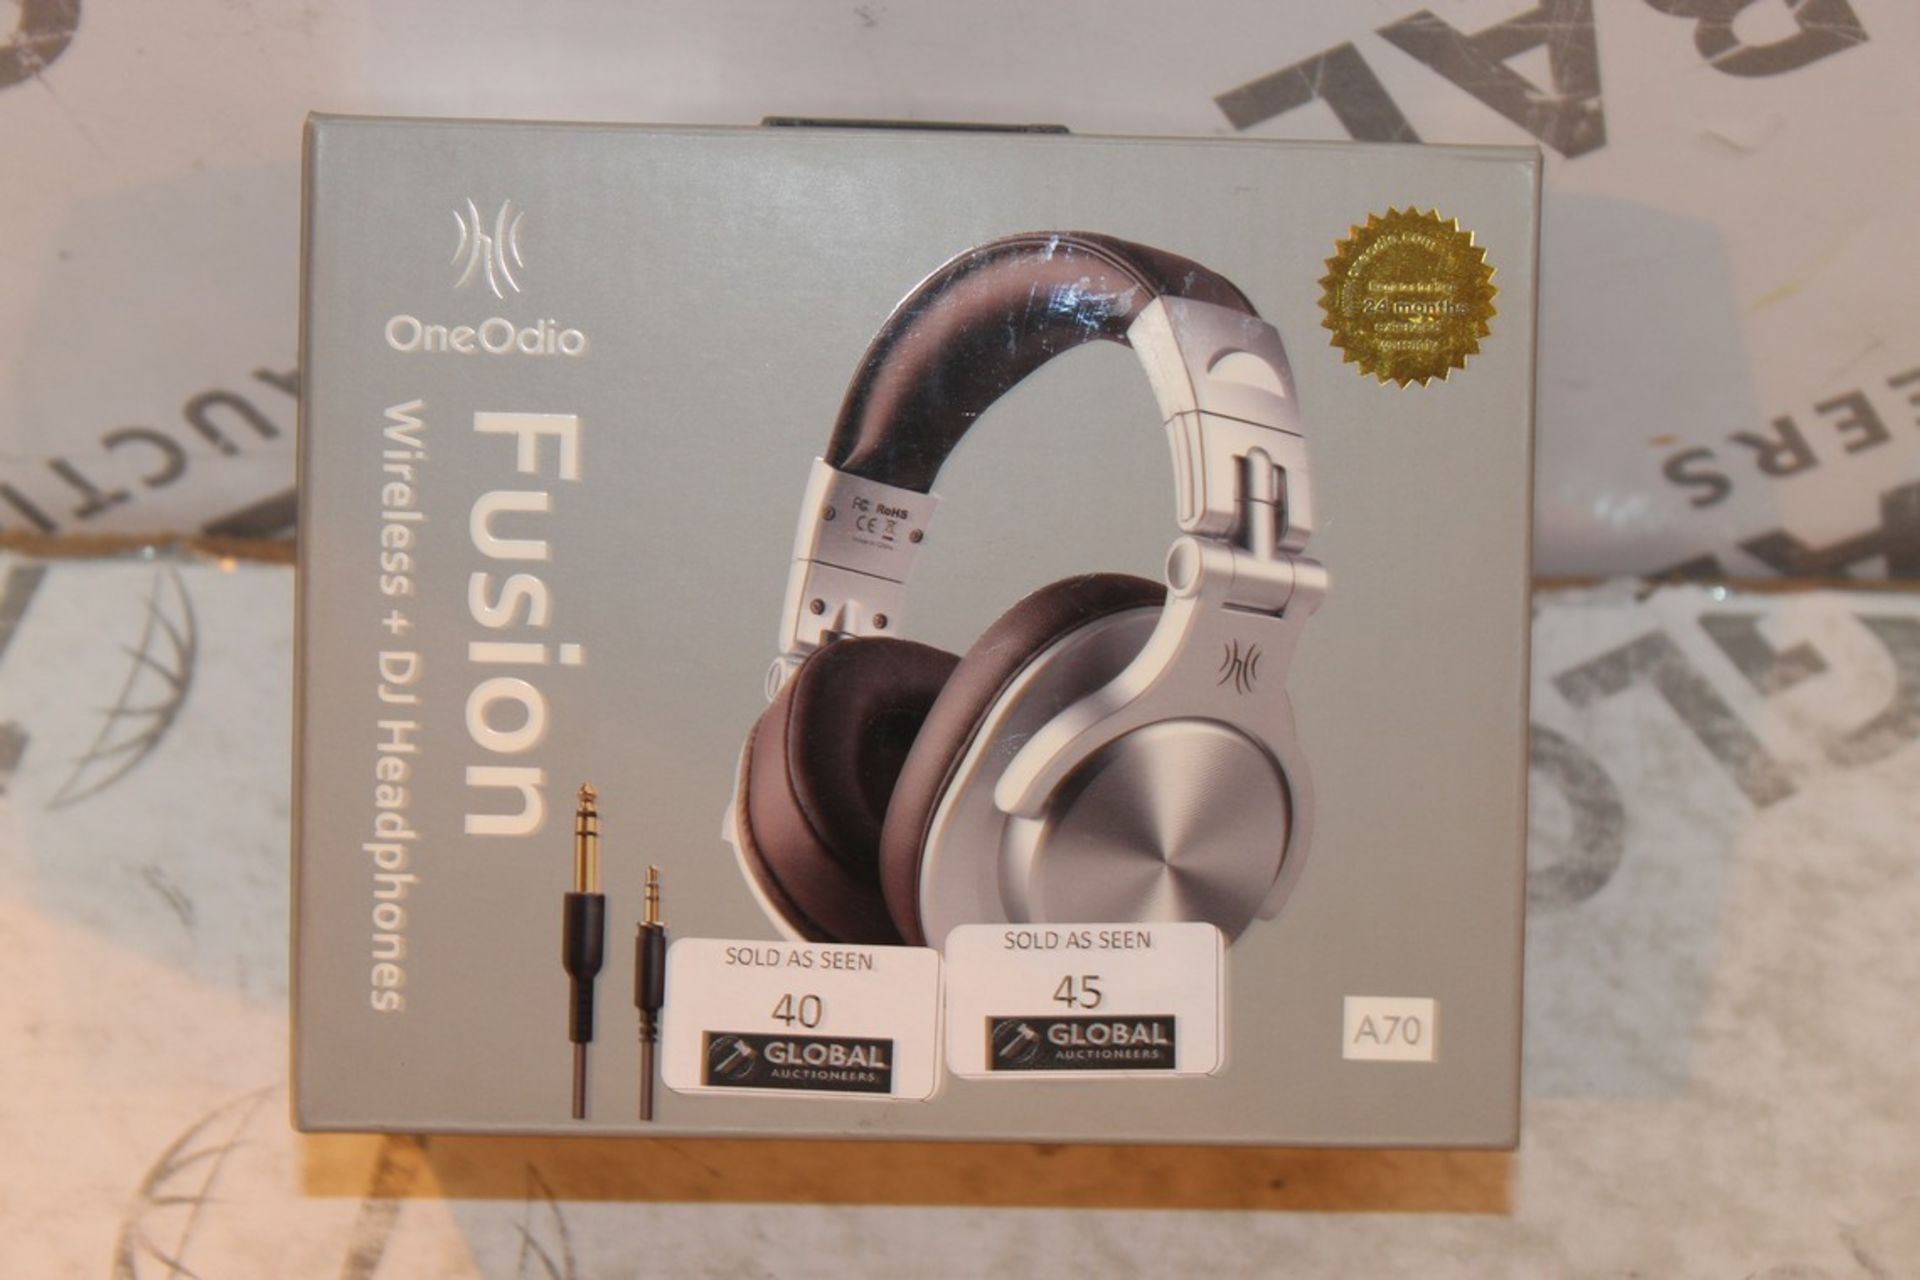 Boxed Brand New Pair One Odio A70 Fusion Wireless & DJ Headphones (Silver) RRP £50 (Appraisals